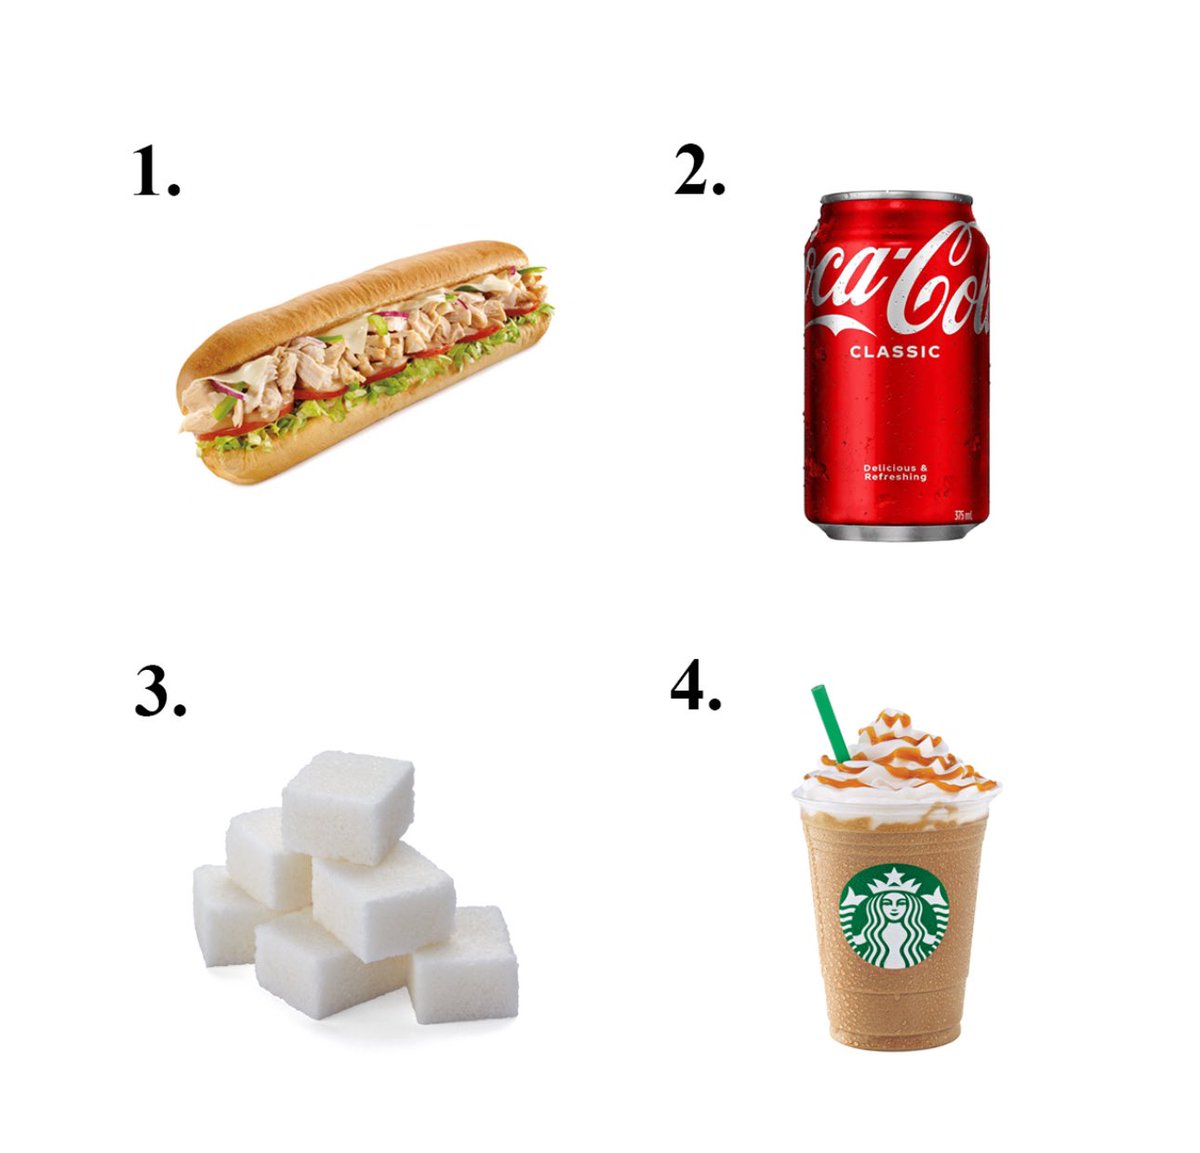 Put these in order, most sugar to least: 1) 12” subway bread role 2) can of Coke 3) 6 cubes of sugar 4) Starbucks Caramel Frappuccino- add your answers below #sugar #hiddensugar #type2diabetes